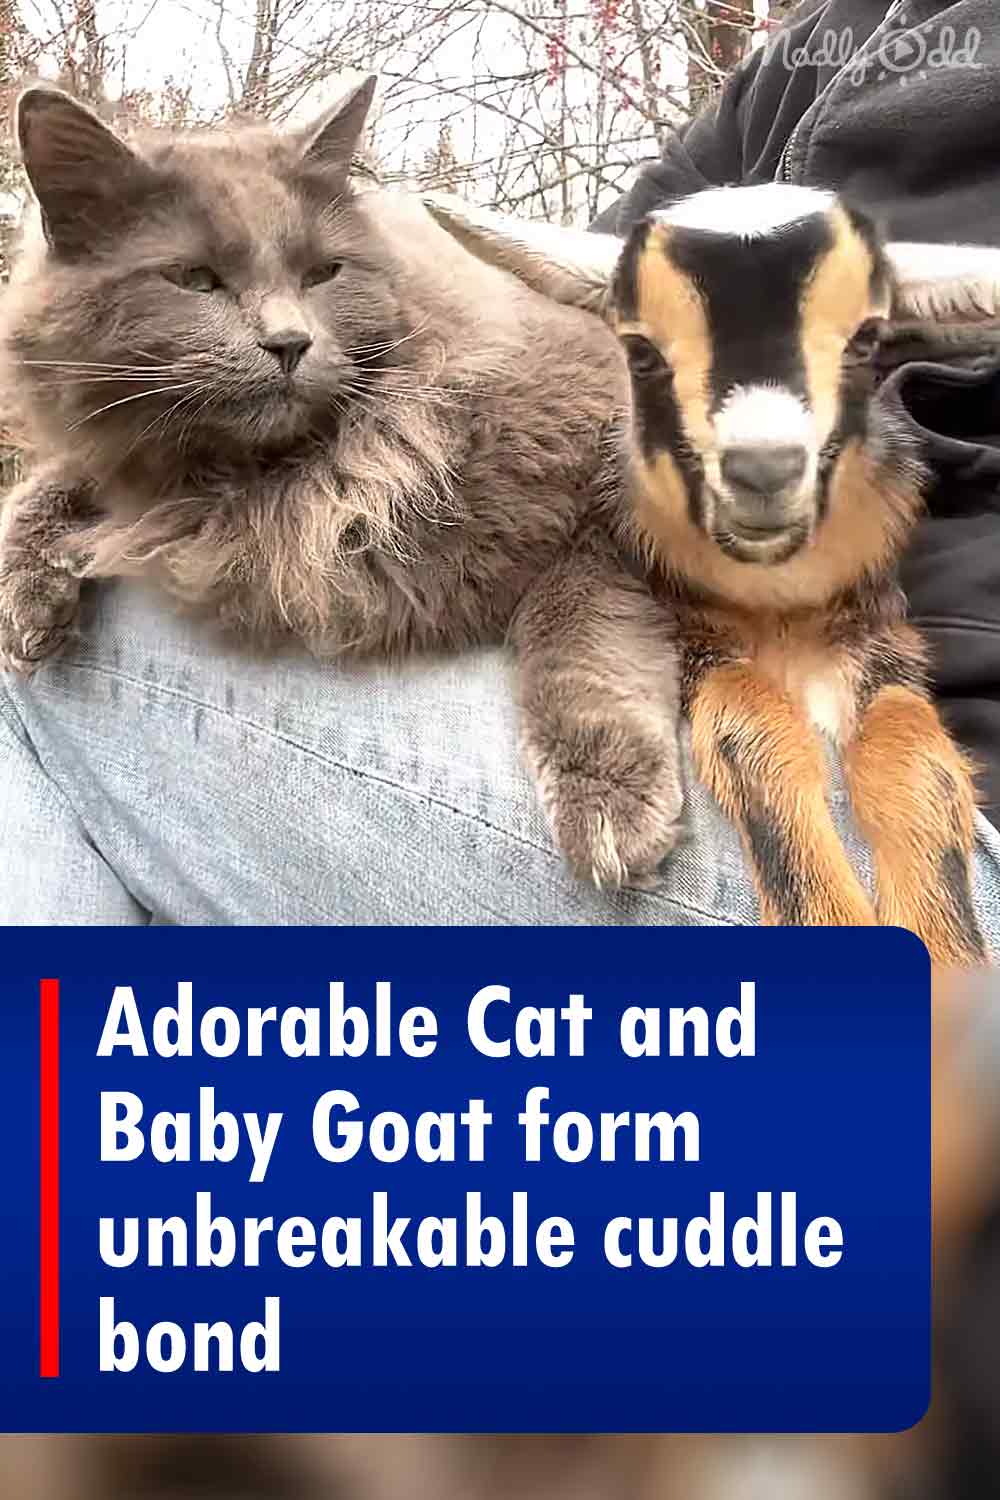 Adorable Cat and Baby Goat form unbreakable cuddle bond